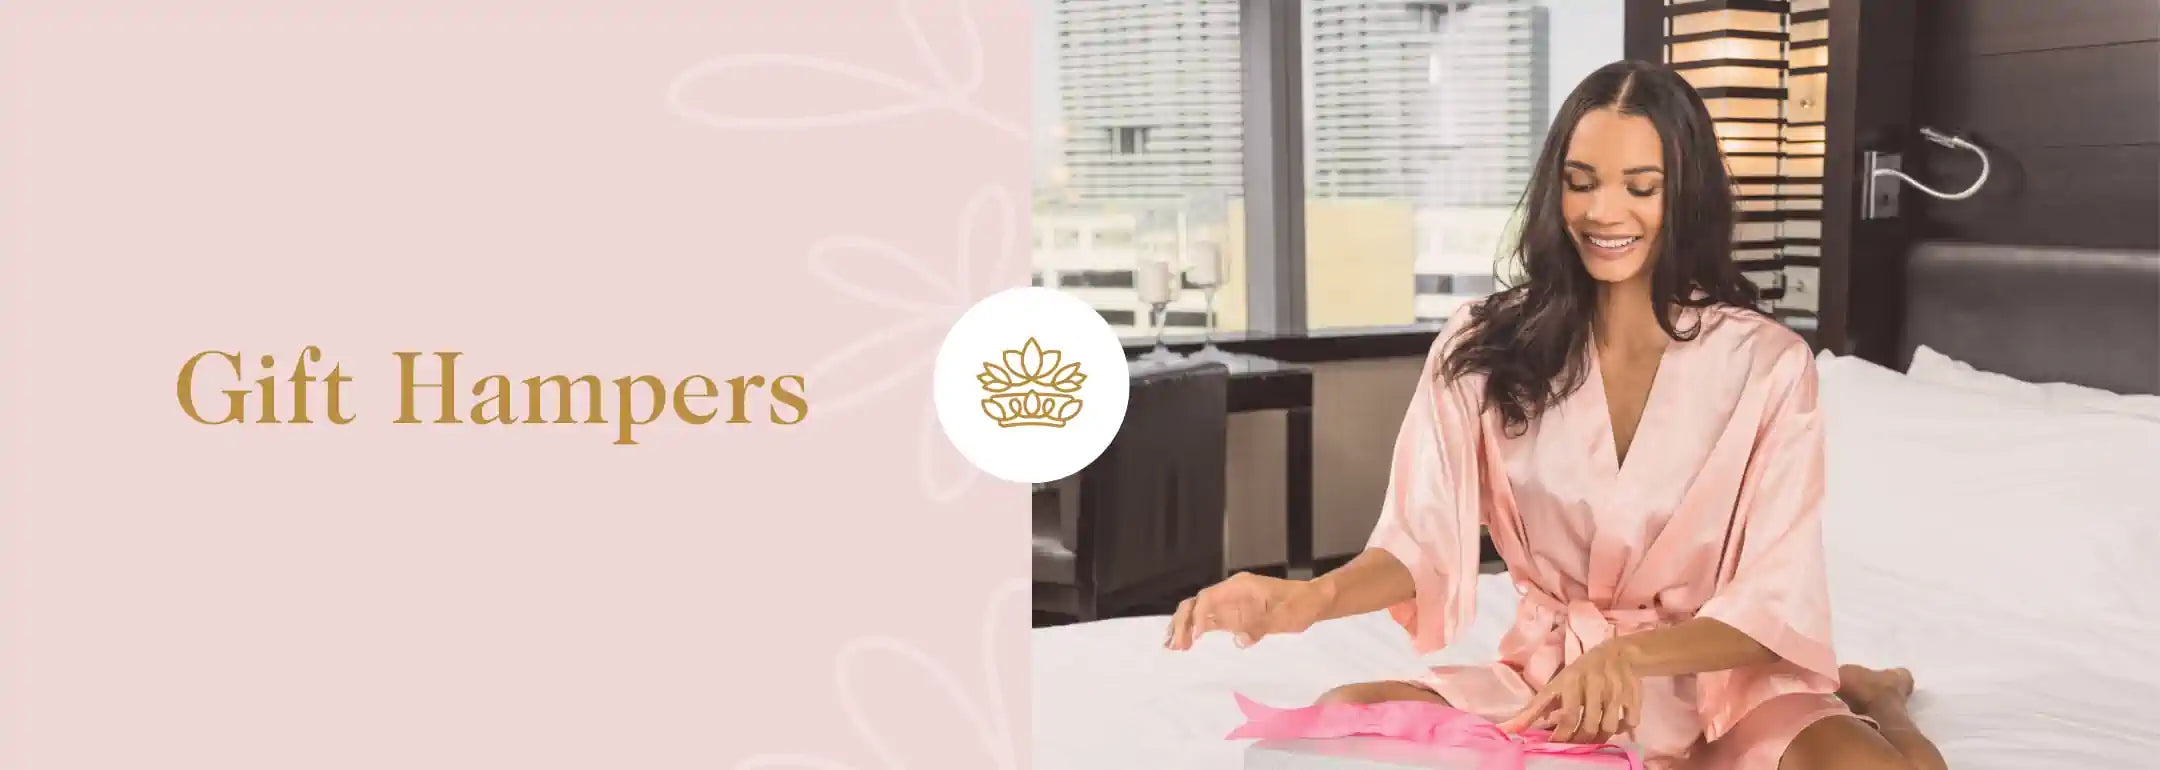 Woman opening gift hampers in her modern hotel room from Fabulous Flowers and Gifts.